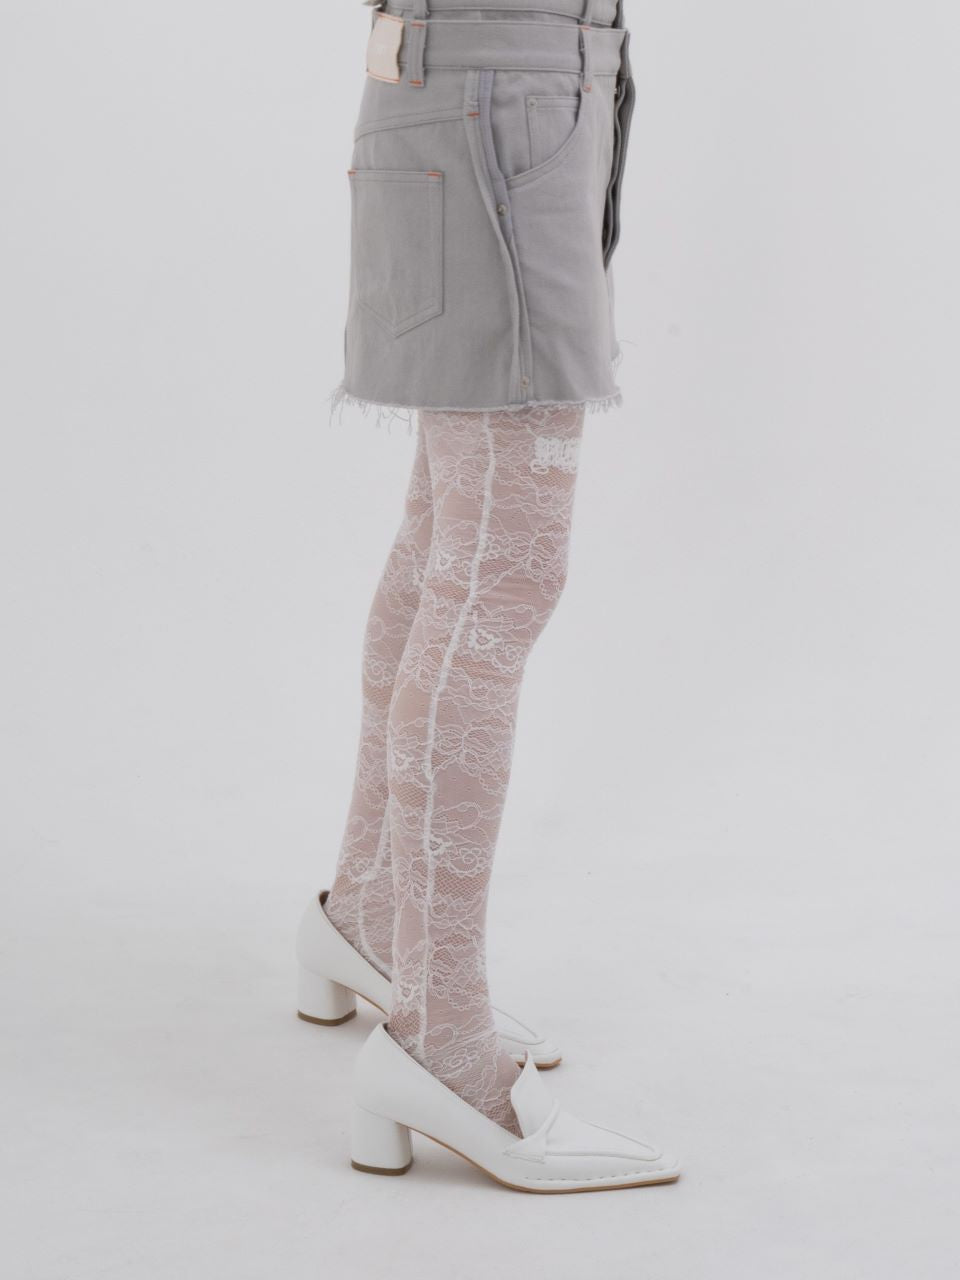 Lace Calligraphy Tights(White)